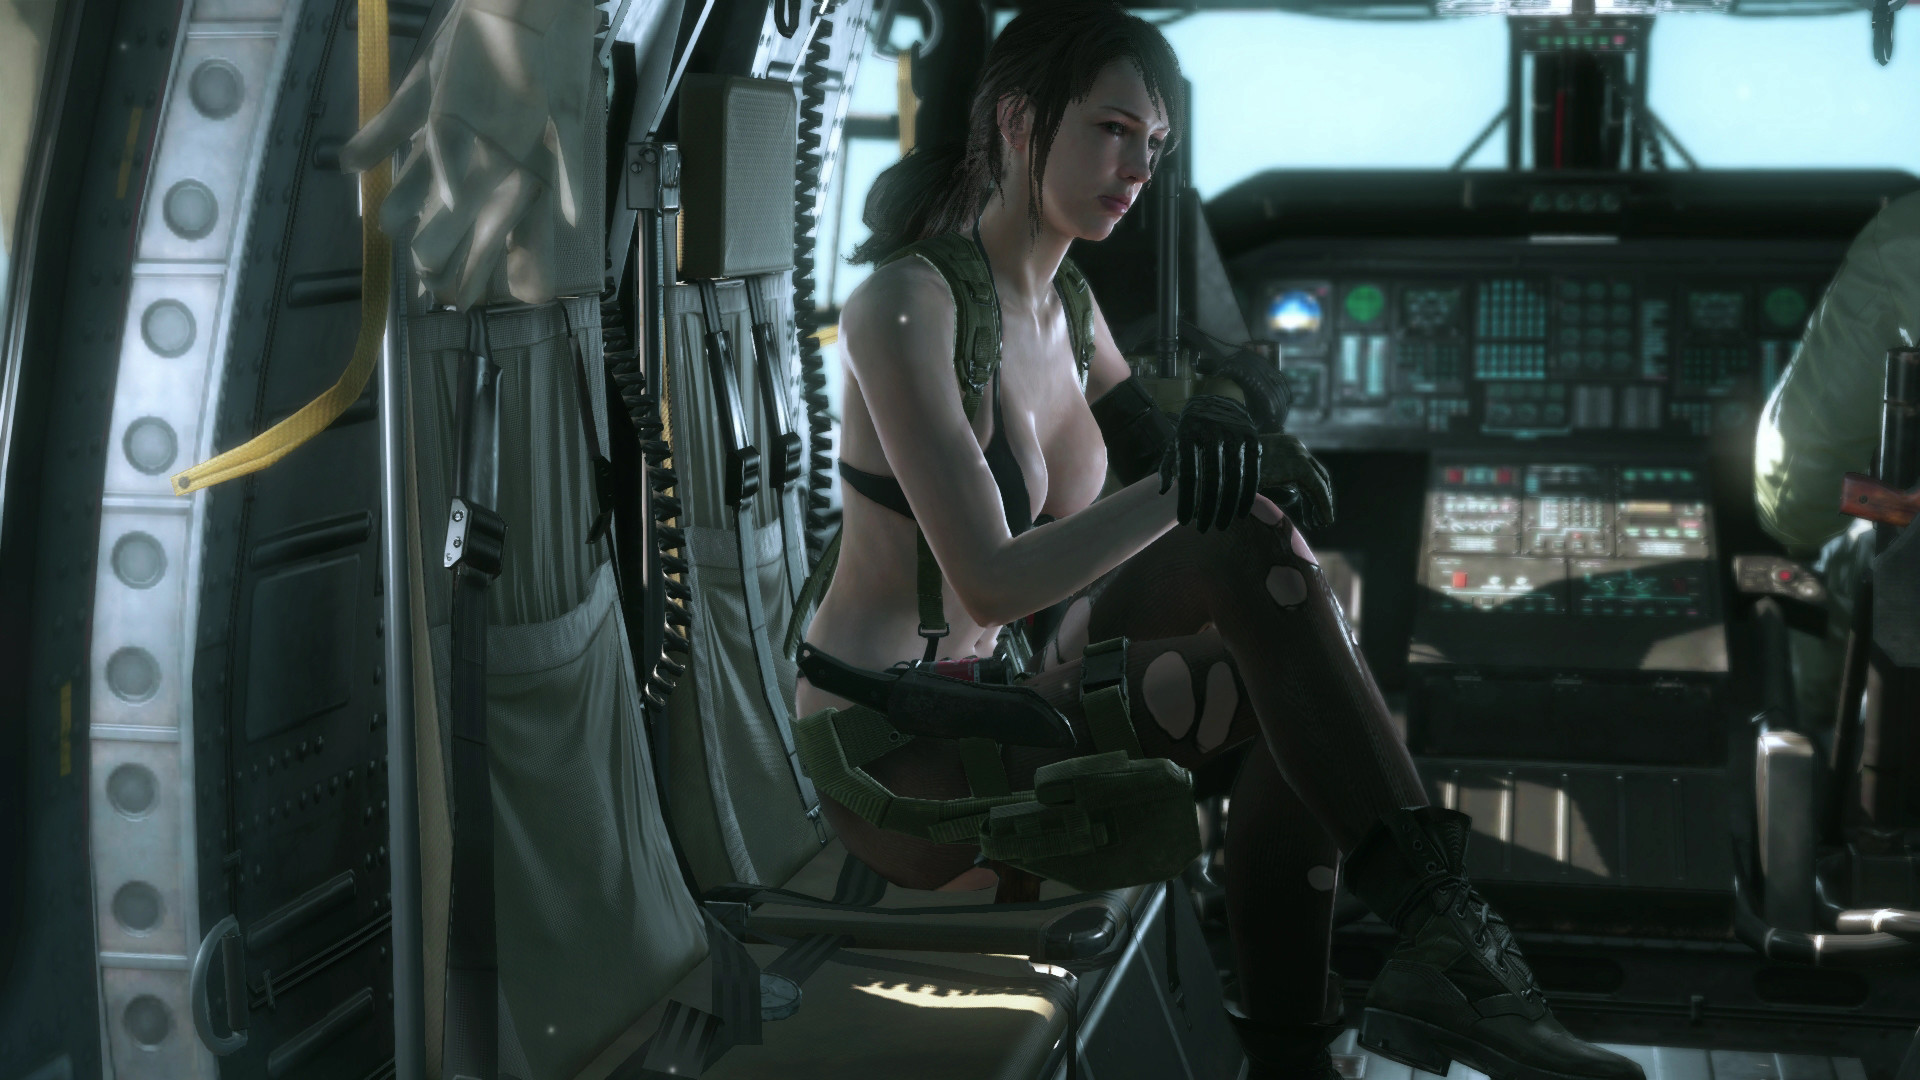 1920x1080 10 Quiet (Metal Gear Solid) HD Wallpapers | Backgrounds - Wallpaper Abyss